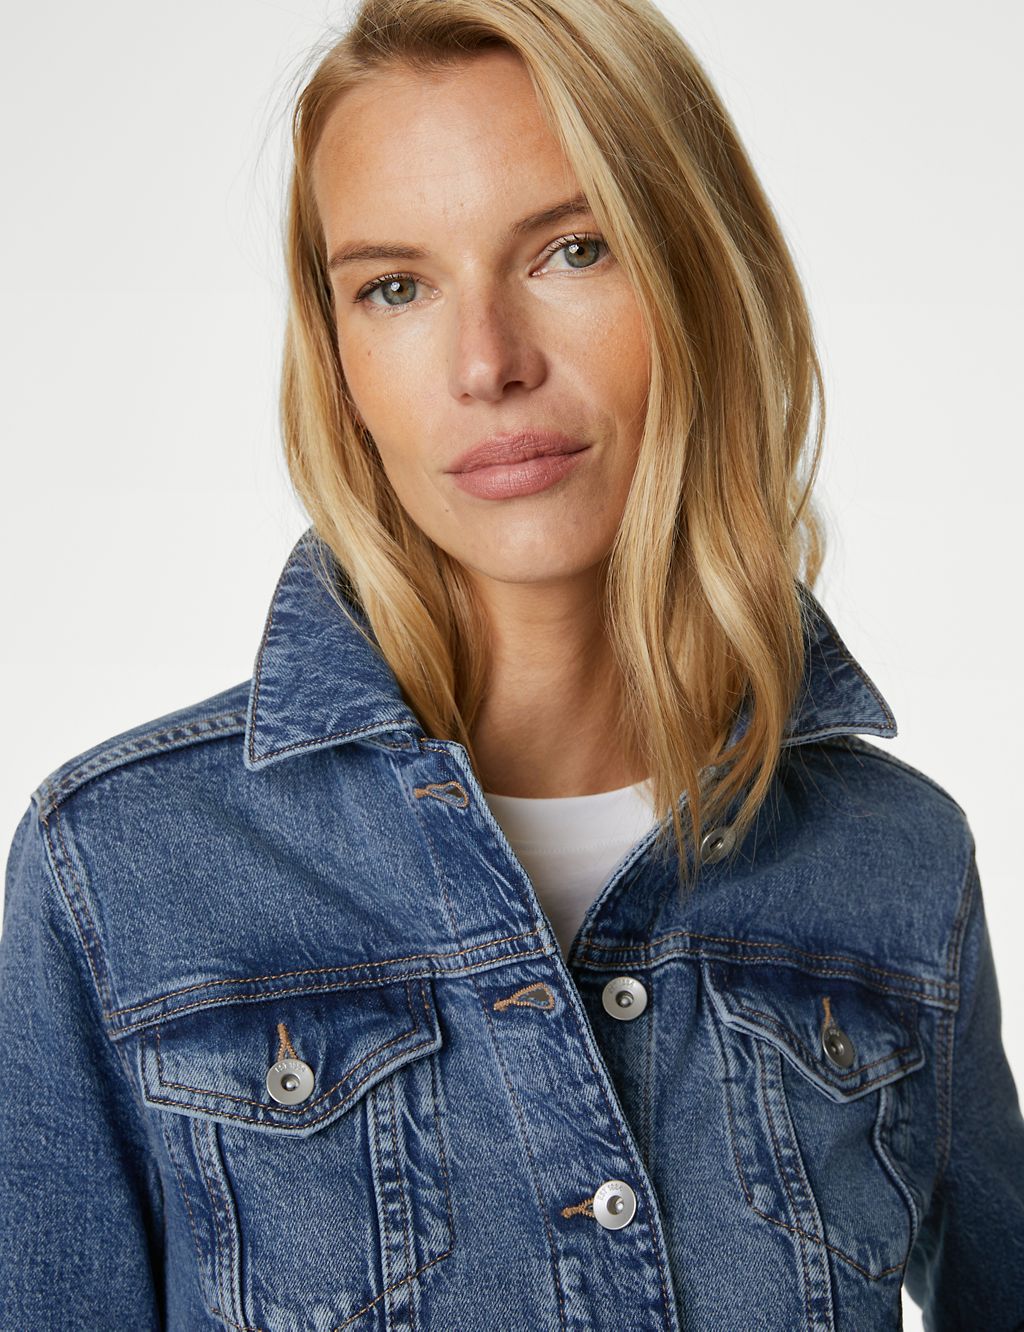 Denim Jacket with Stretch | M&S Collection | M&S